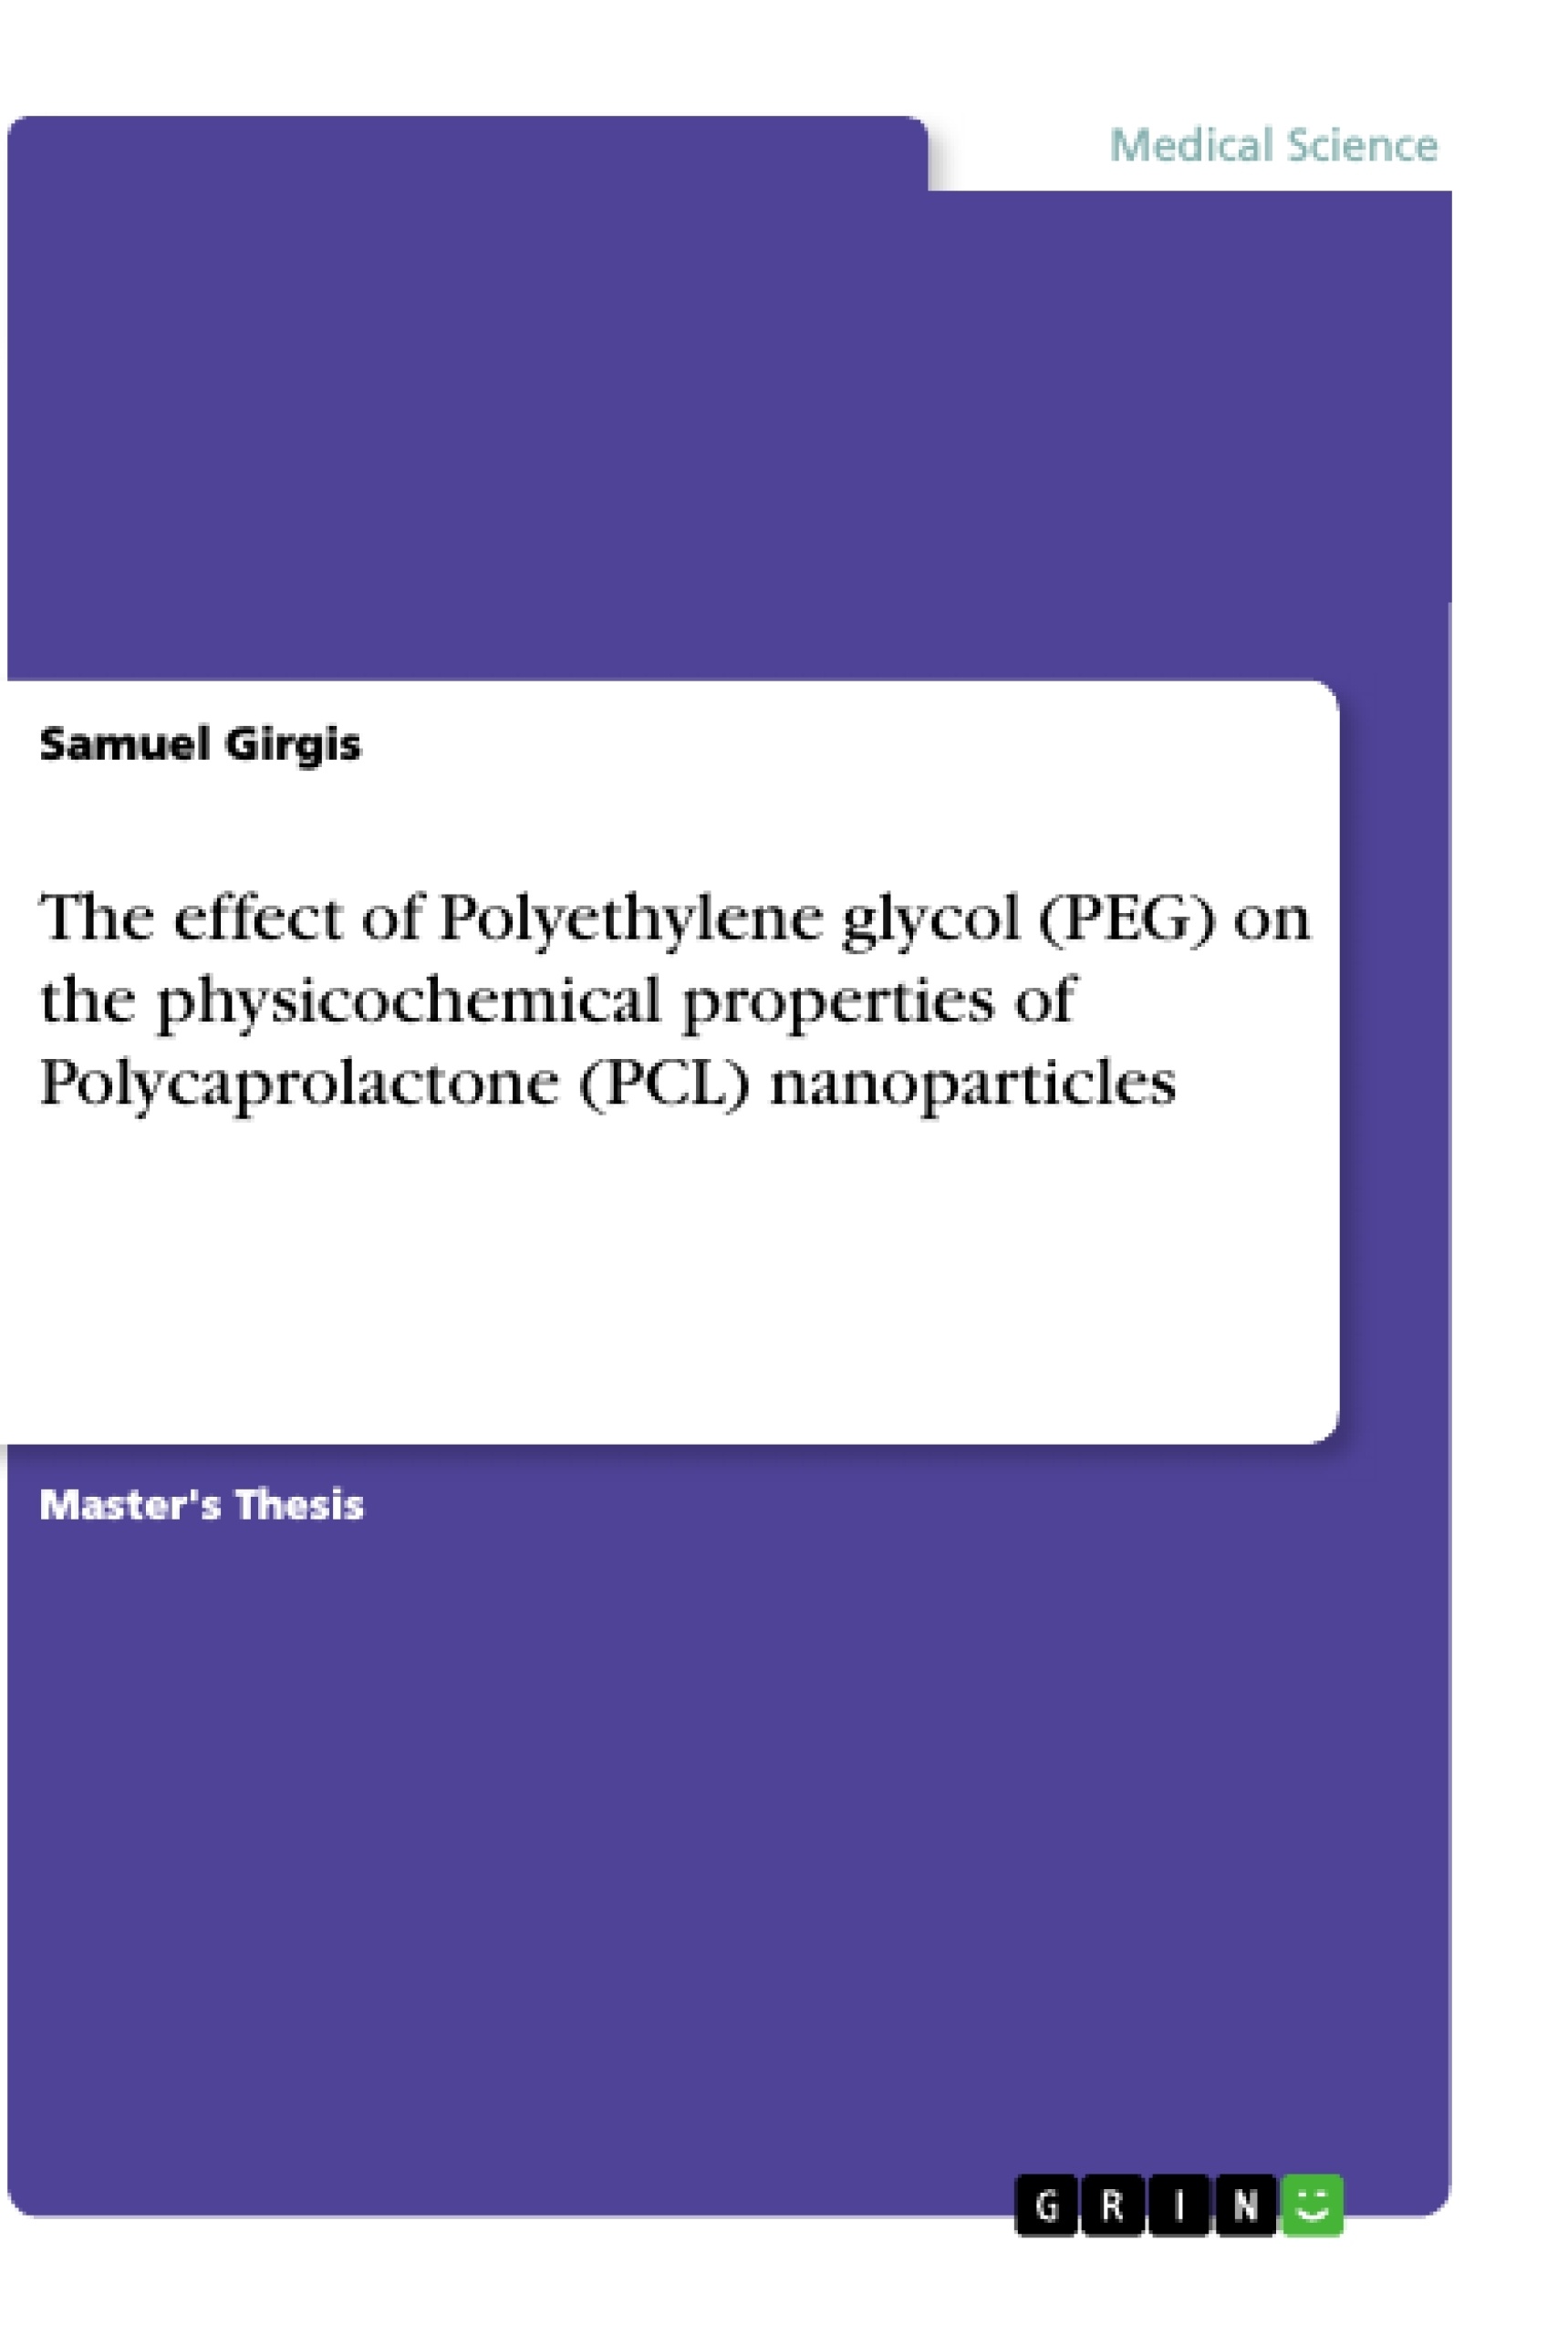 Título: The effect of Polyethylene glycol (PEG) on the physicochemical properties of Polycaprolactone (PCL) nanoparticles